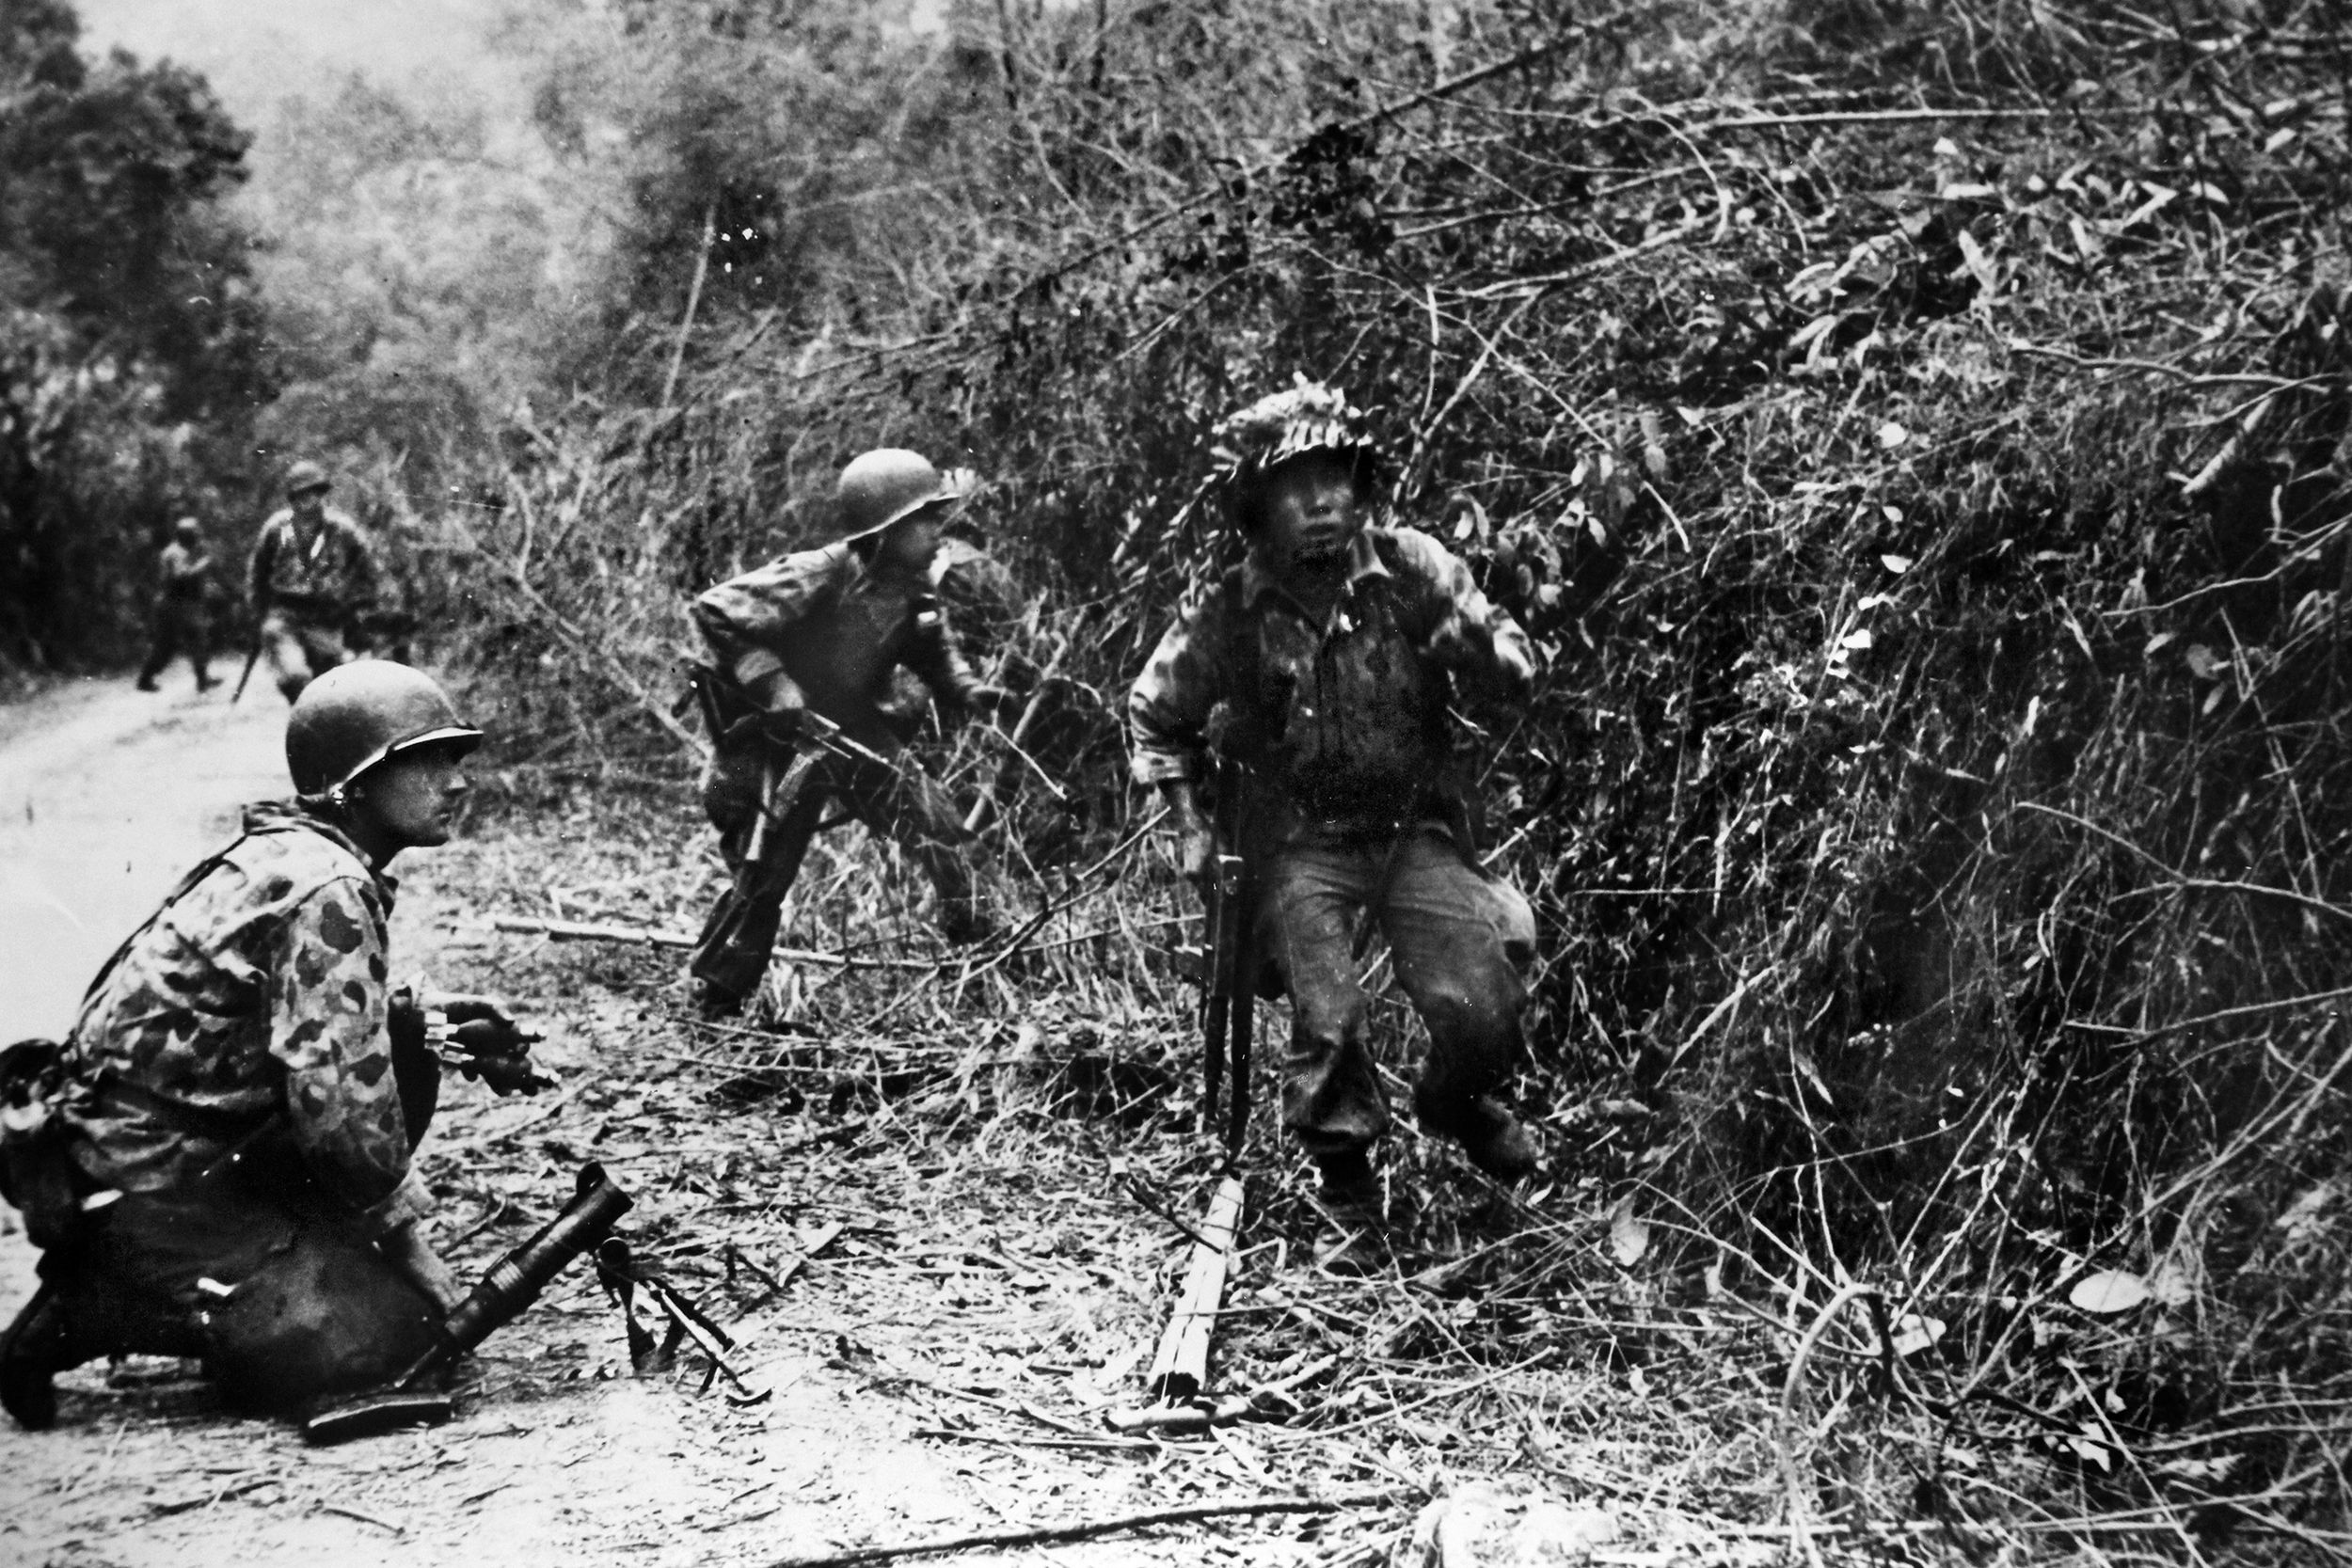 The 1st Foreign Parachute Battalion (1er BEP) during the Battle of Hòa Bình (November 1951 to February 1952) in which the French tried to lure the Viet Minh into fighting more conventionally in open country.